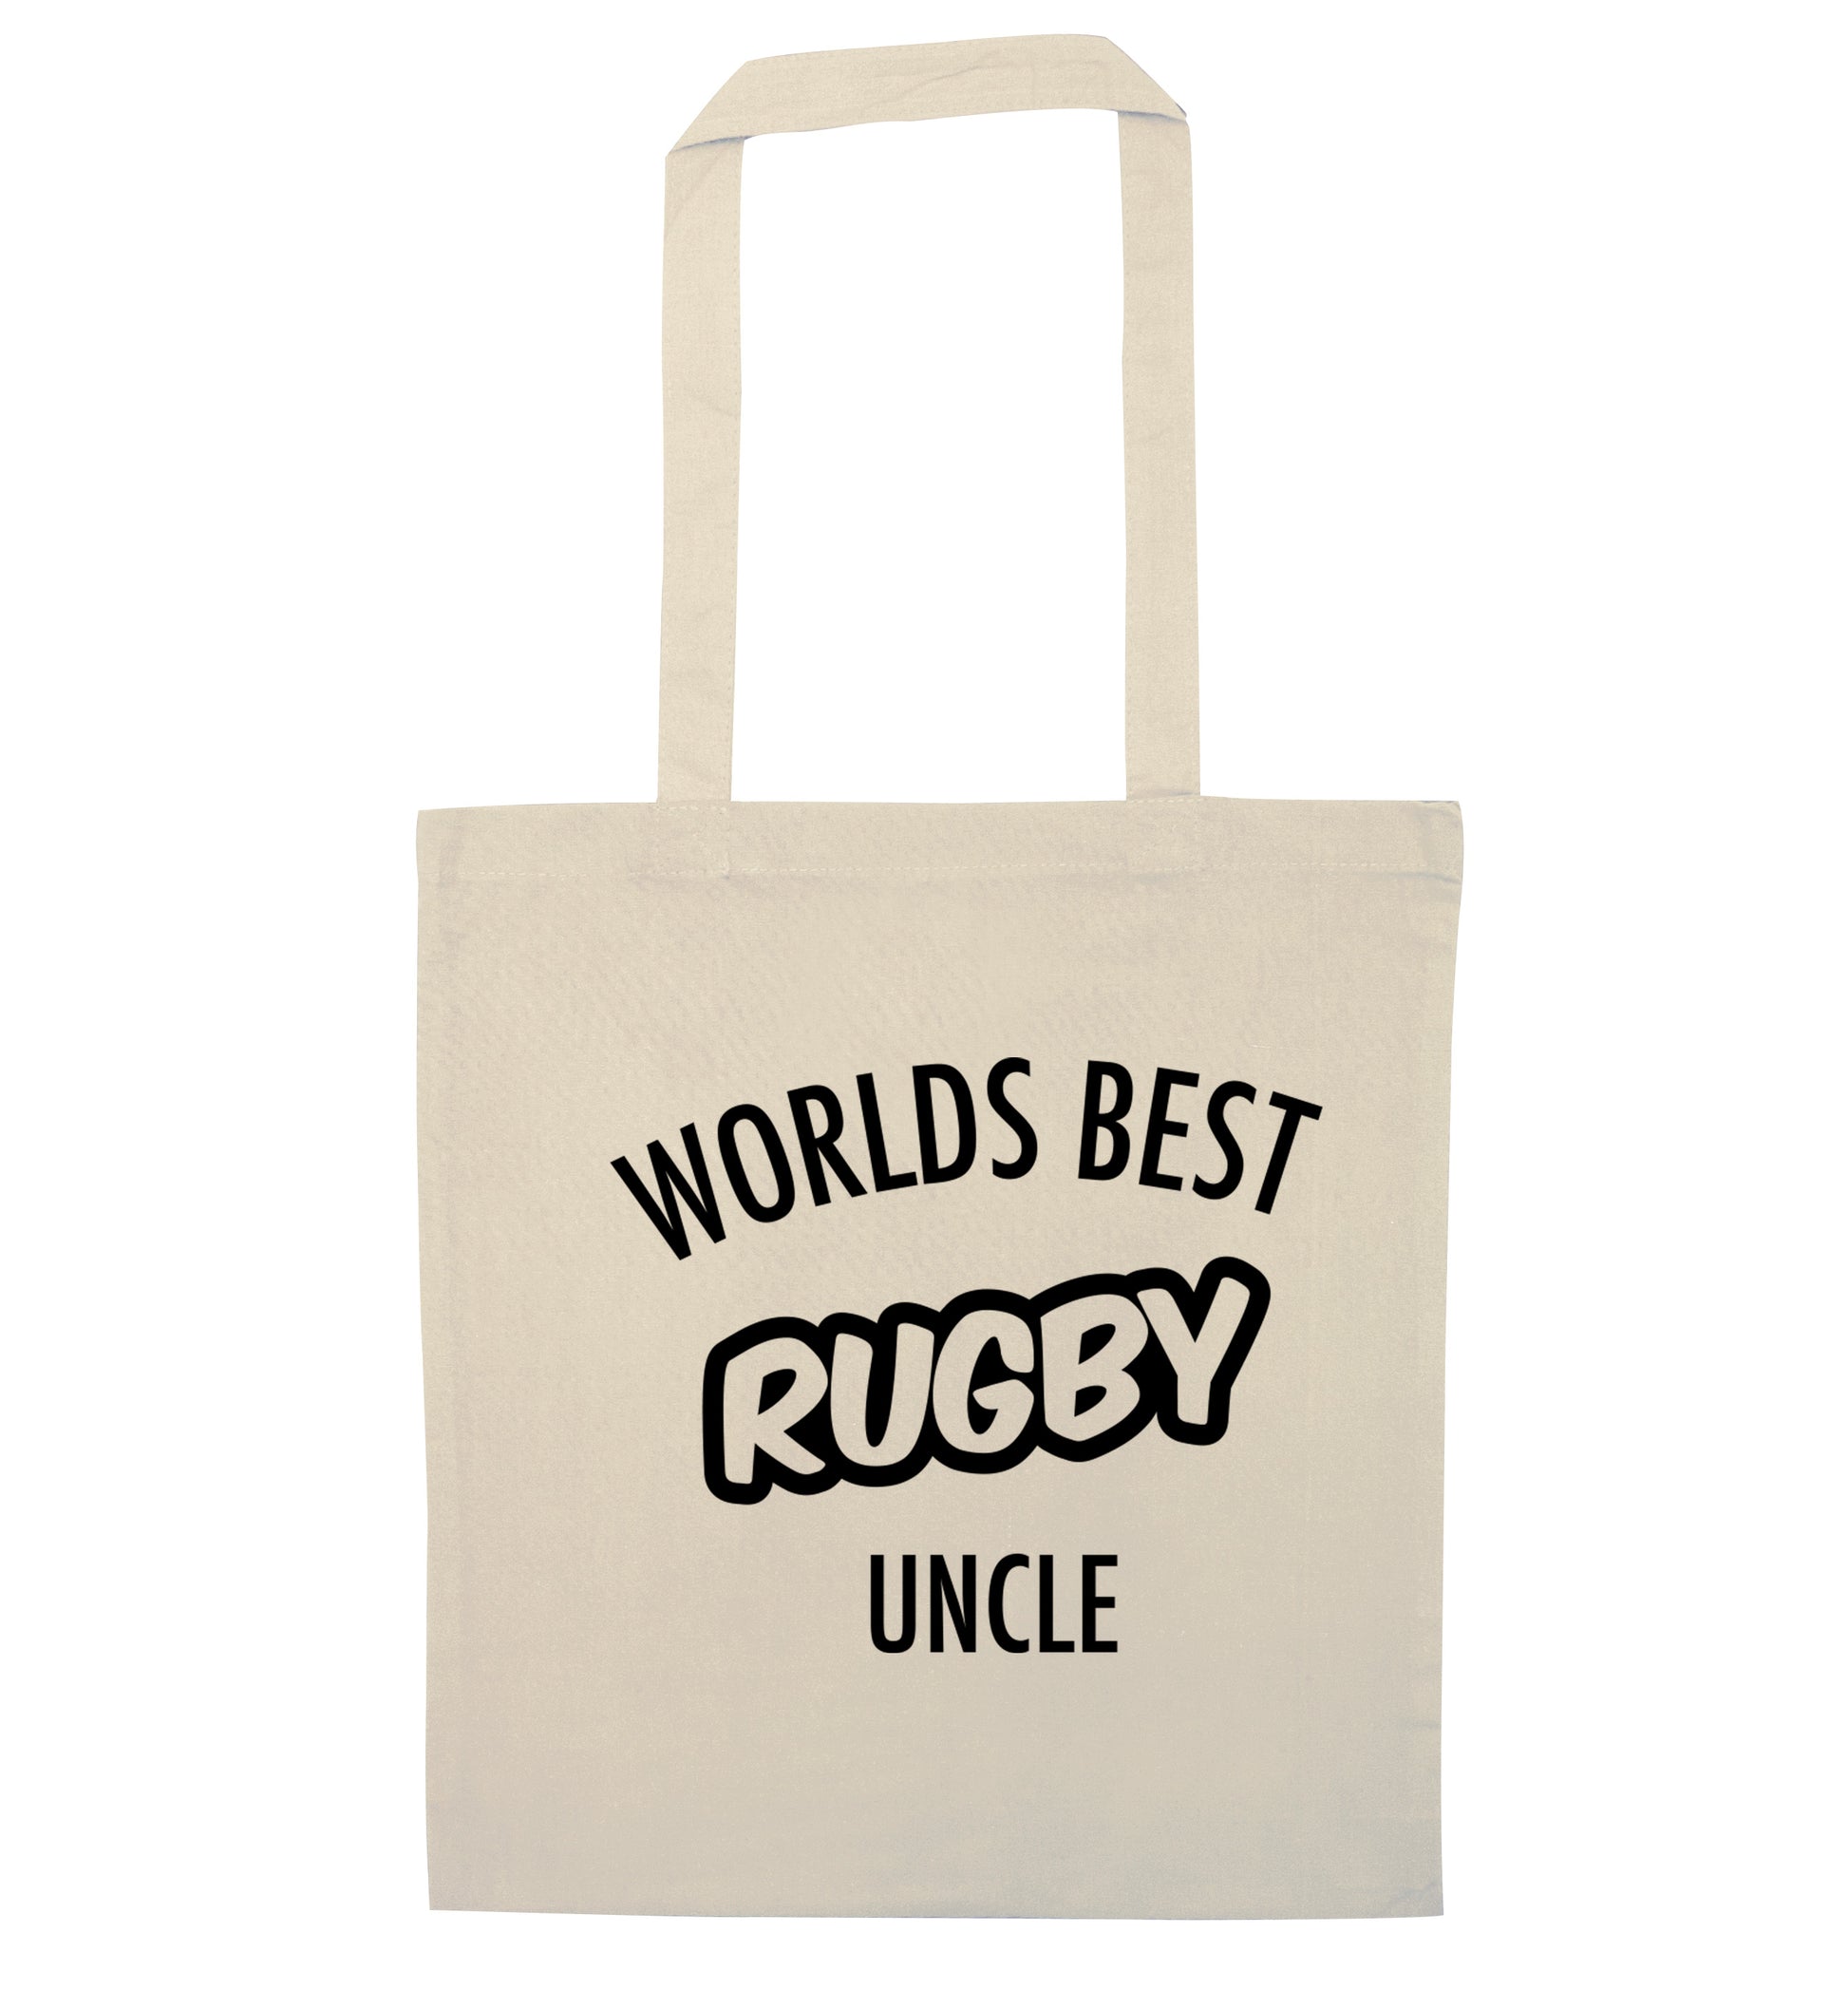 Worlds best rugby uncle natural tote bag